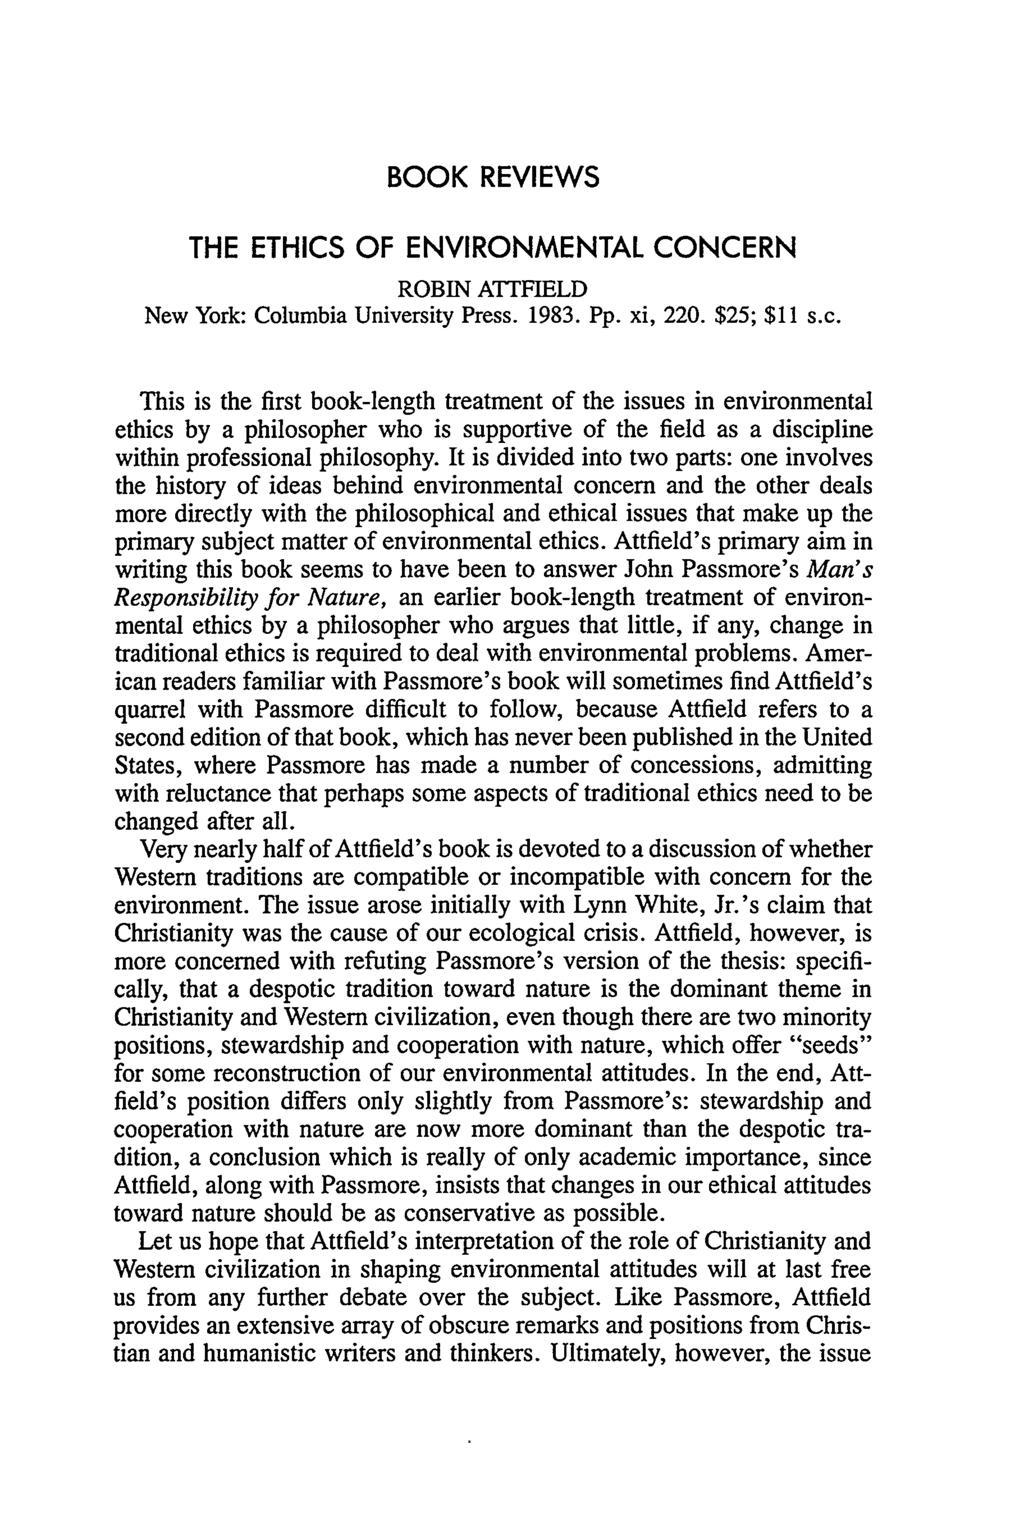 BOOK REVIEWS THE ETHICS OF ENVIRONMENTAL CONCERN ROBIN ATTFIELD New York: Columbia University Press. 1983. Pp. xi, 220. $25; $11 s.c.